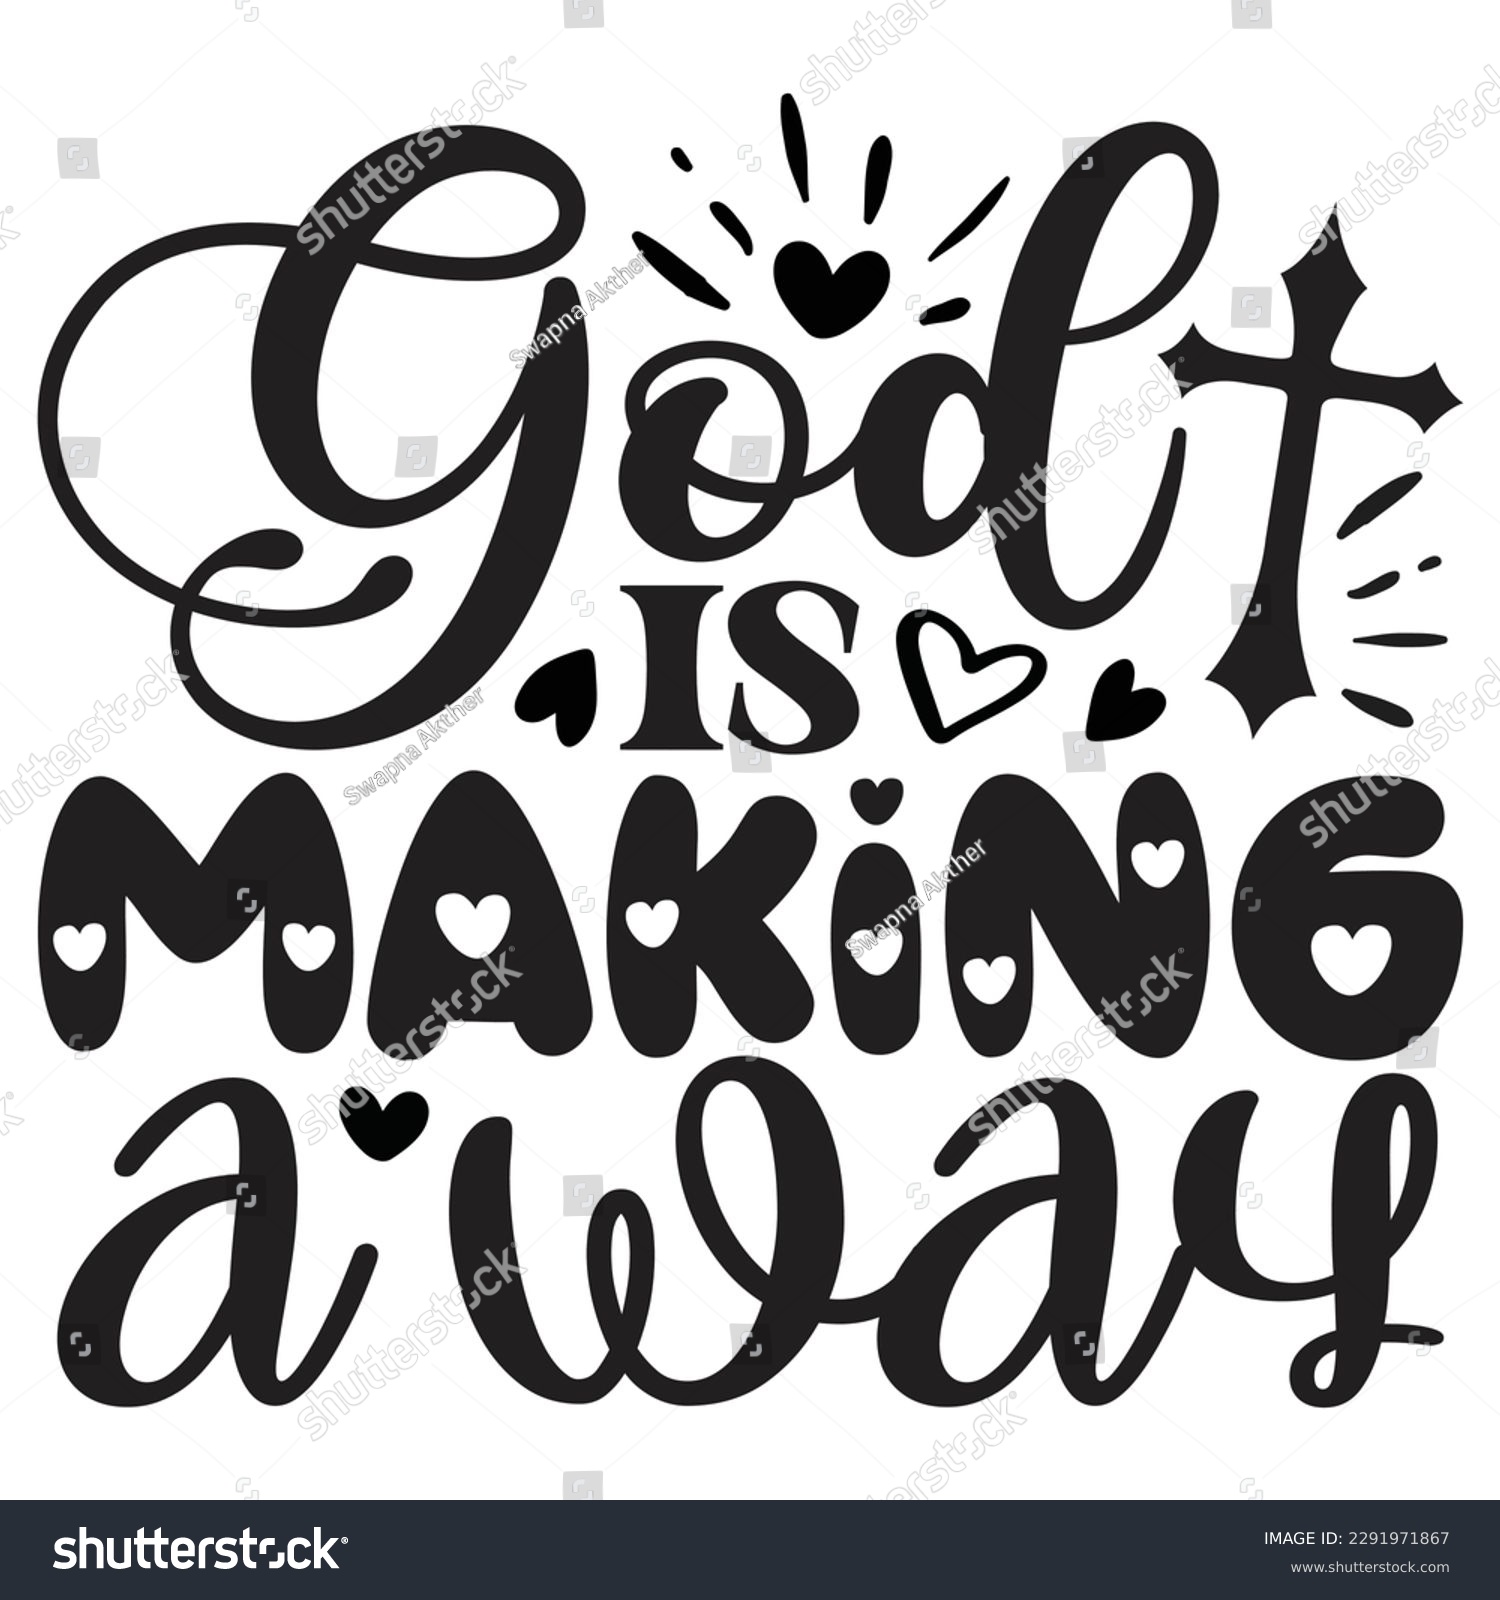 SVG of God Is Making A Way - Jesus Christian SVG And T-shirt Design, Jesus Christian SVG Quotes Design t shirt, Vector EPS Editable Files, can you download this Design. svg